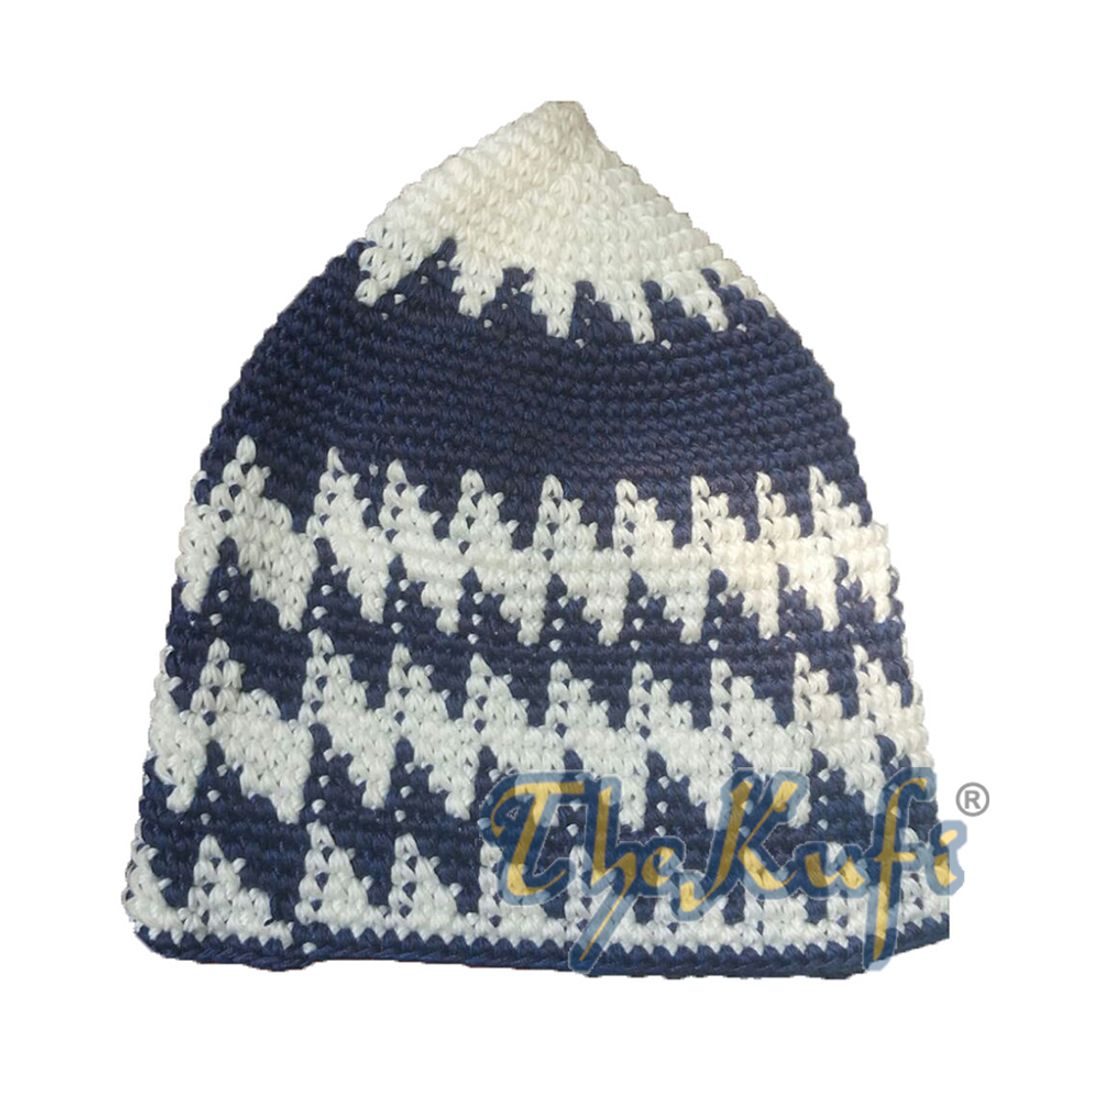 Hand-crocheted Cotton Sturdy Off-White & Cobalt Blue Mix Hounds-tooth Zigzag Kufi Hat